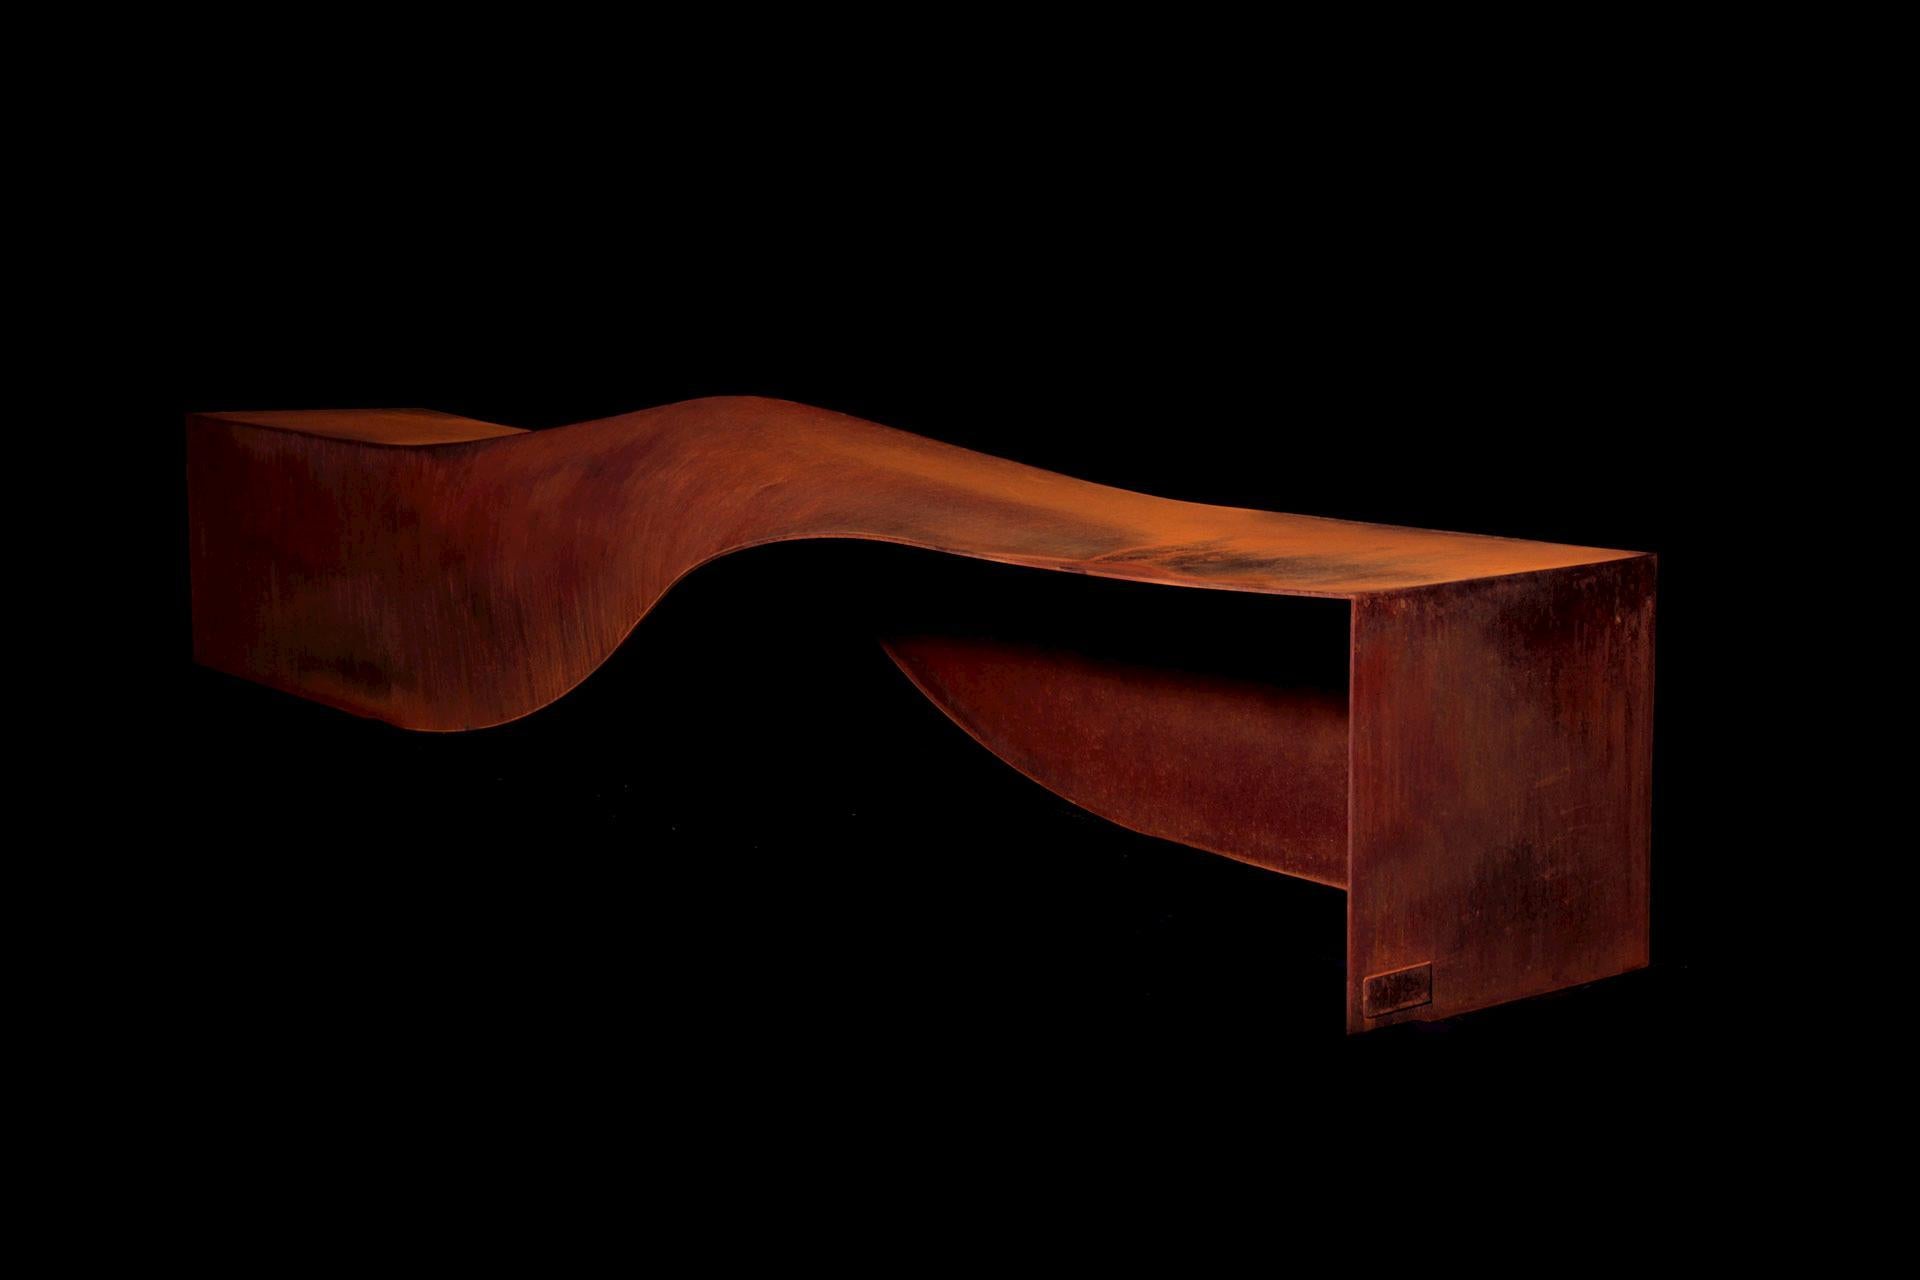 Soul sculpture COR-Ten steel bench medium by Veronica Mar
Dimensions: D 250 x W 69 x H 68 cm. SH: 45 cm.
Materials: COR-ten steel.

It is available in 2.5 meters & 3 meters long.

Soul, anima, immaterial entity, vital principle, internal essence,